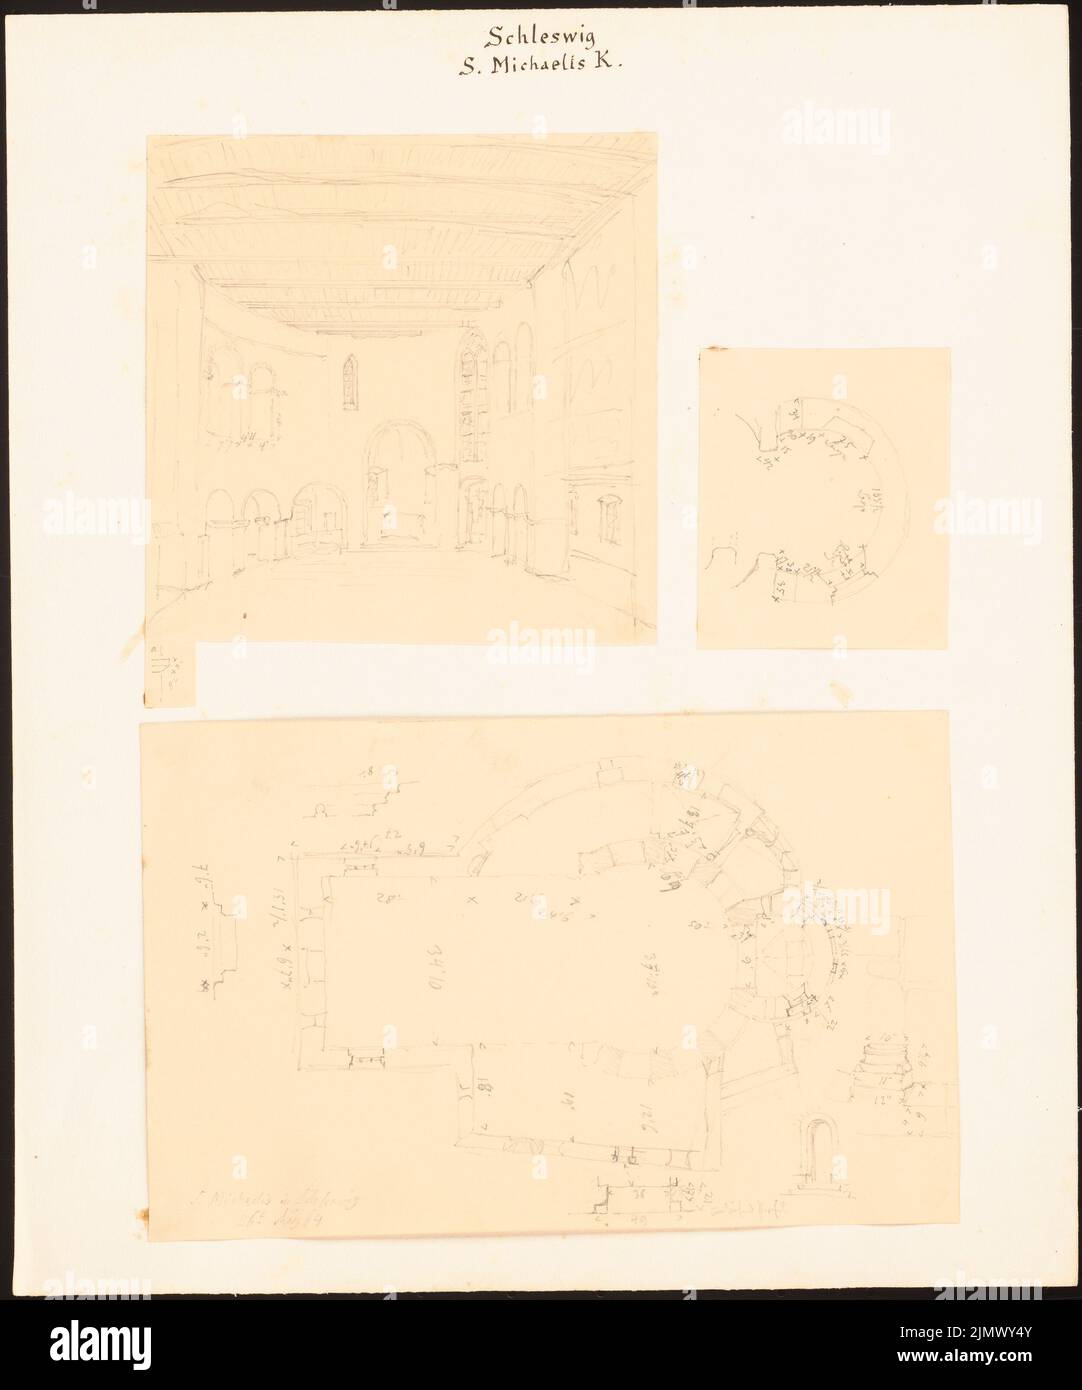 Quast Ferdinand von (1807-1877), St. Michael in Schleswig (March 26, 1864): Three leaves: Perspective interior view to the altar, floor plan of the altarnian, fleeting floor plan with details: cut window arch, base pillar. Pencil on paper, 34.9 x 29 cm (including scan edges) Quast Ferdinand von  (1807-1877): St. Michael, Schleswig Stock Photo